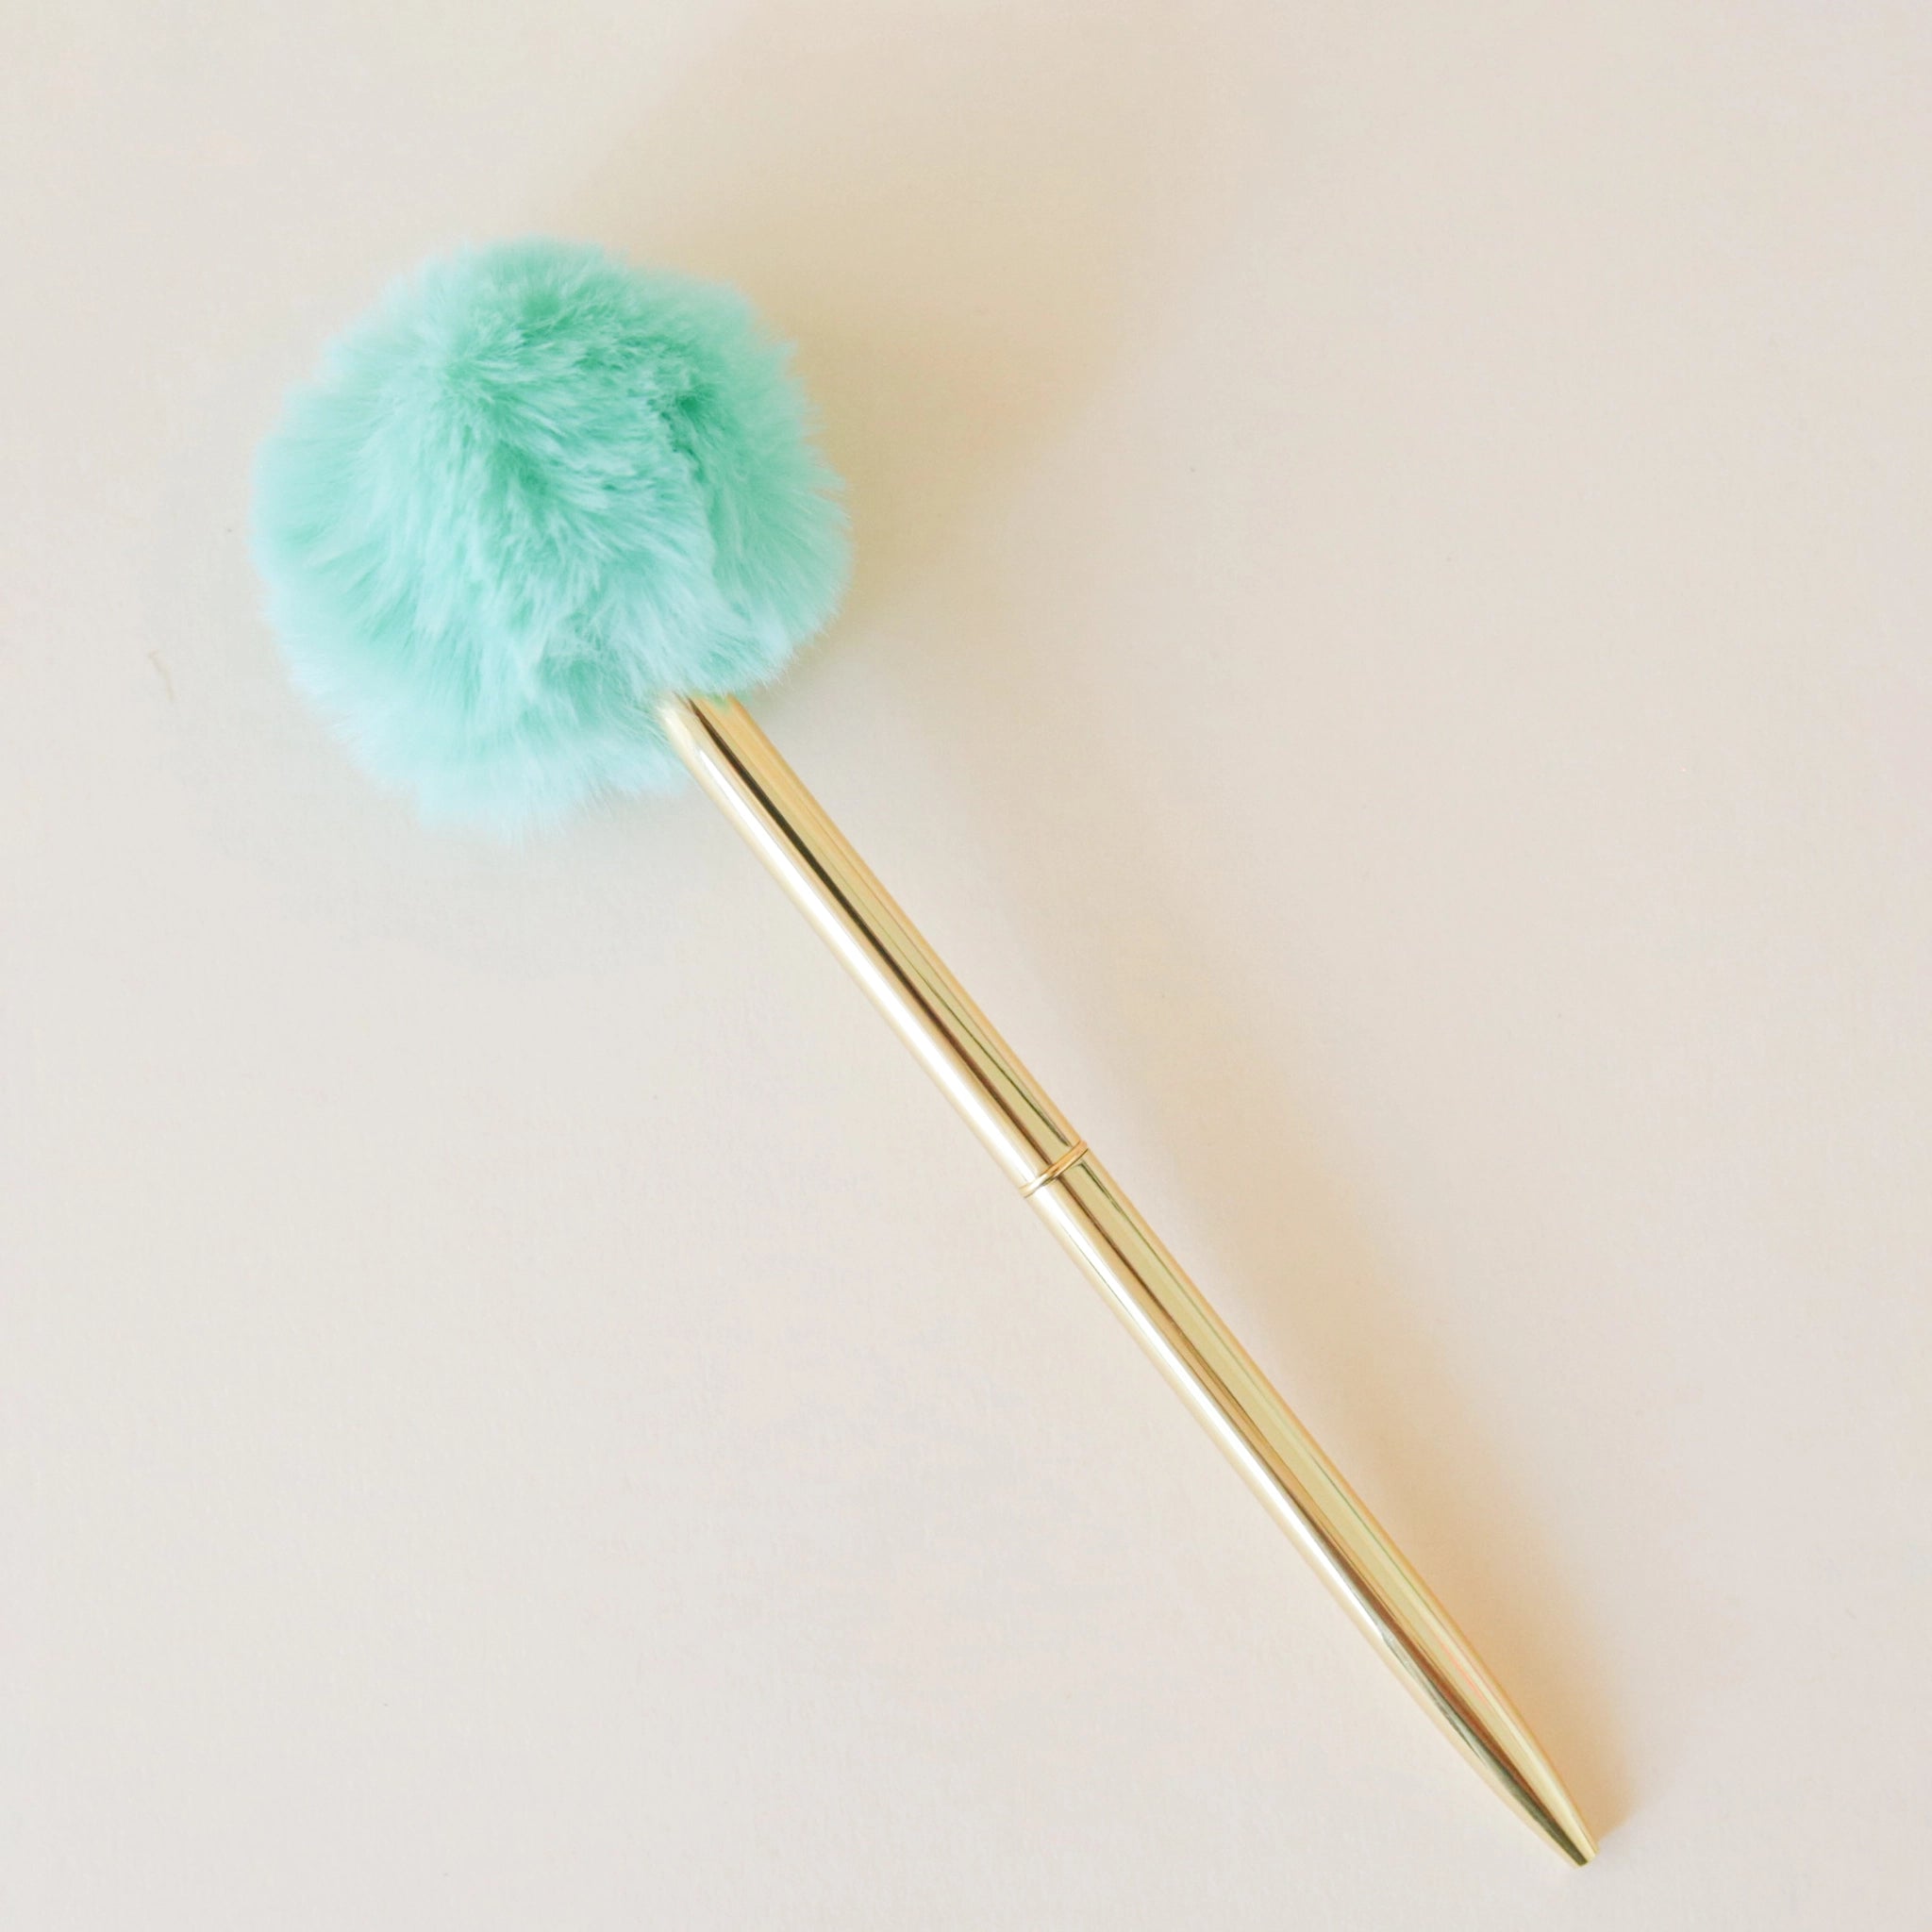 A thin gold pen with a fluffy mint green pom pom at the end.